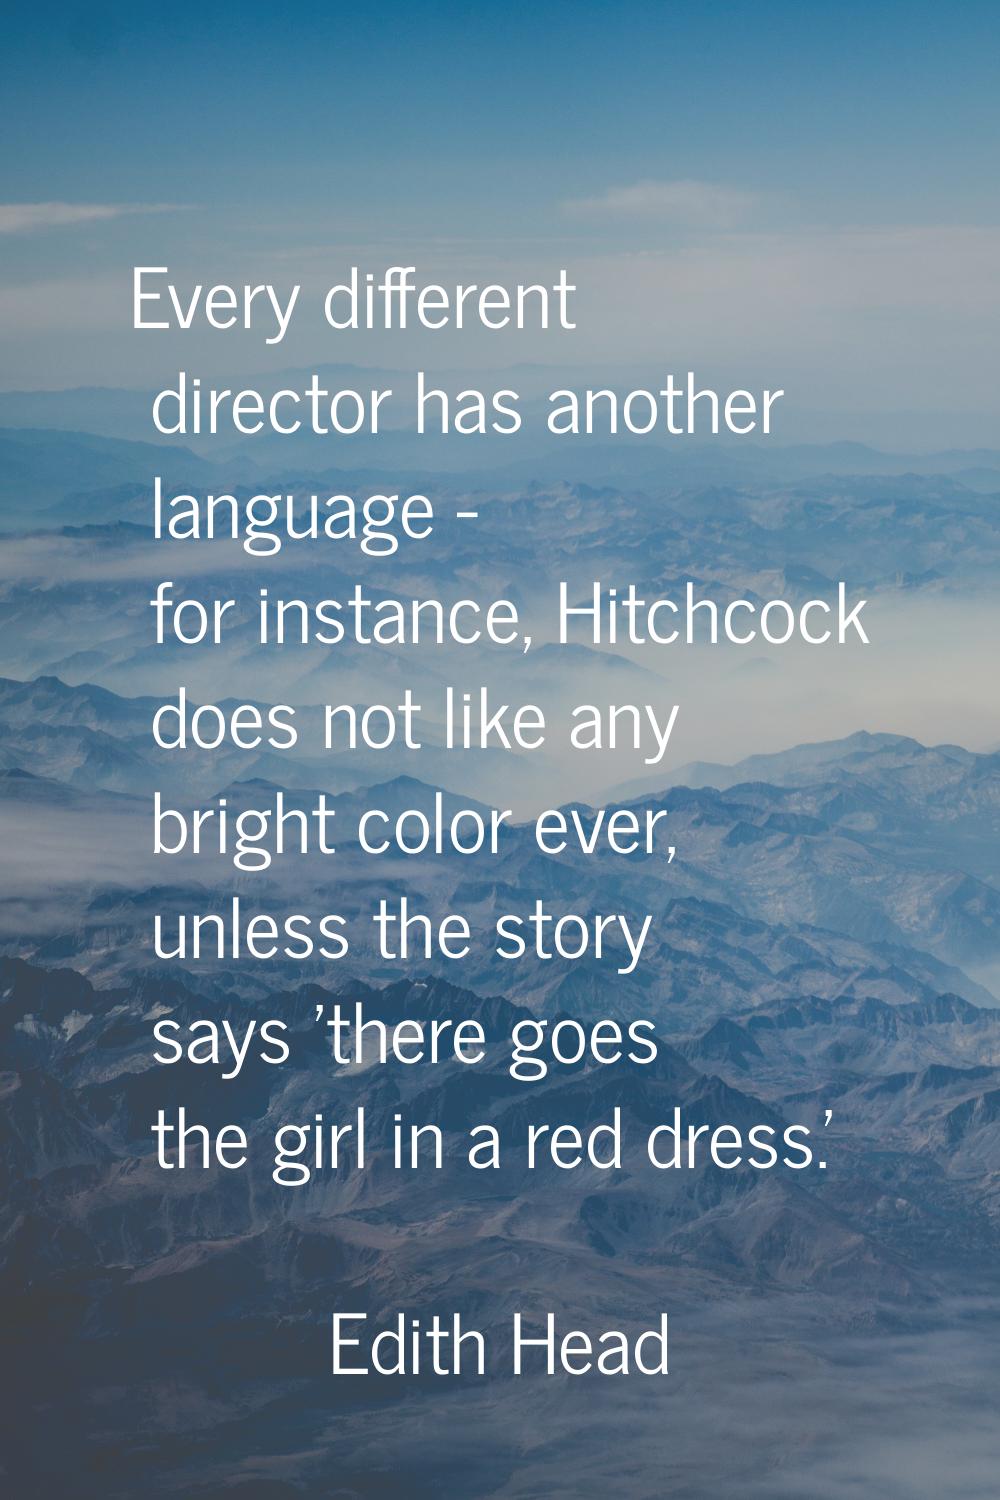 Every different director has another language - for instance, Hitchcock does not like any bright co